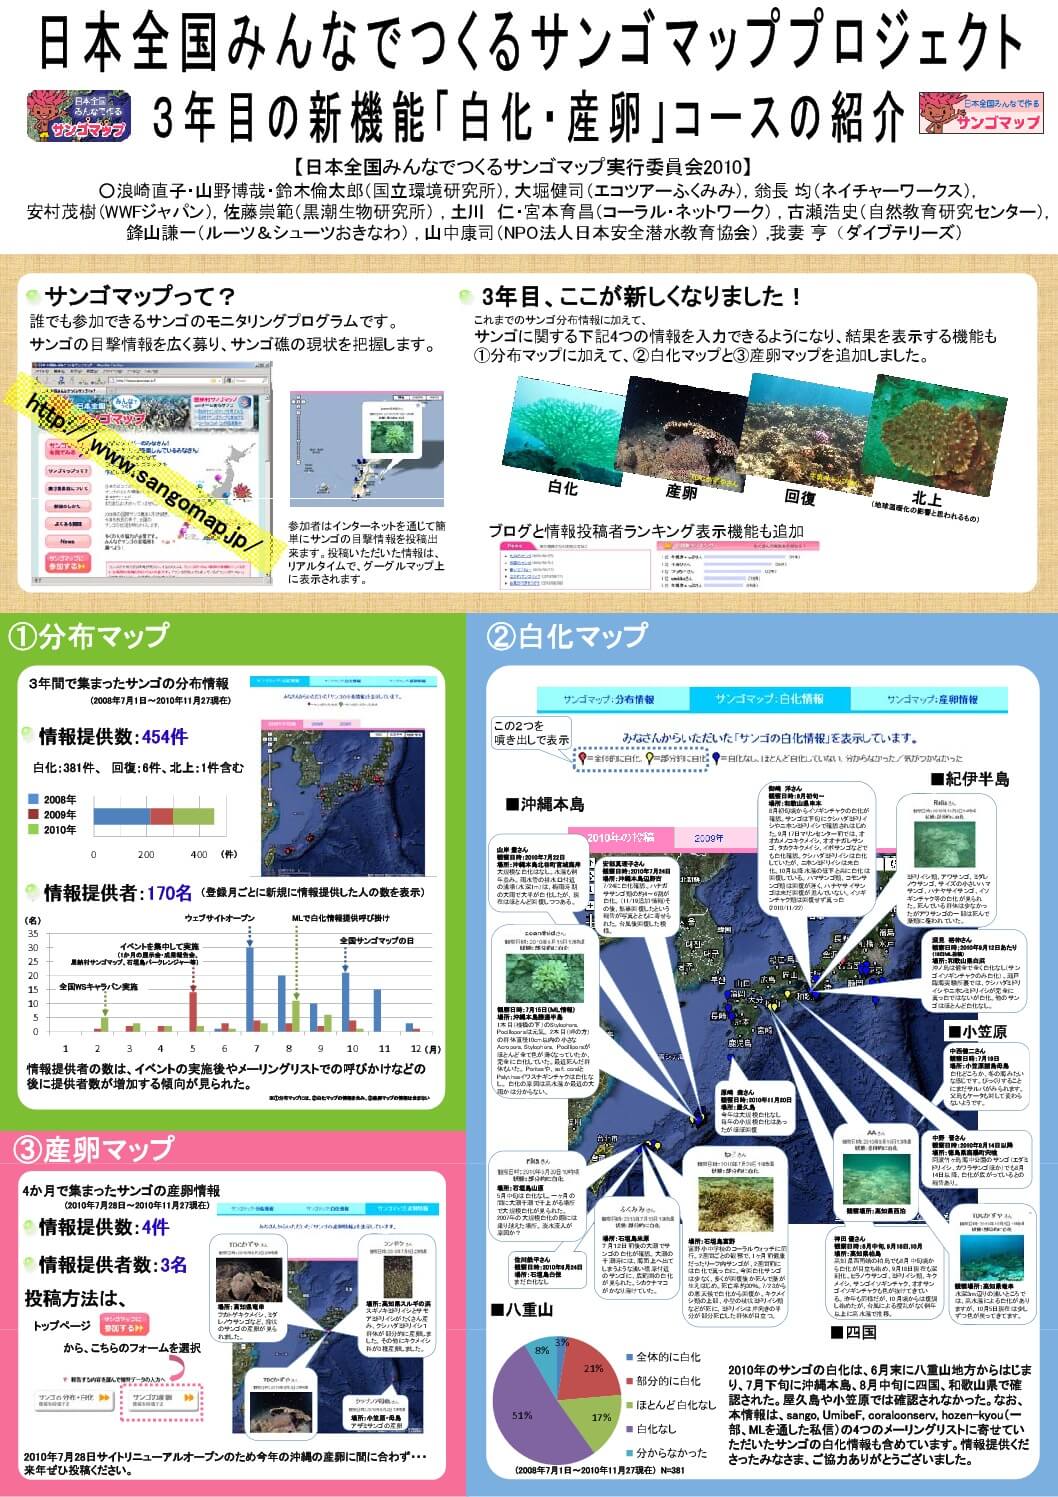 2010JCRS_Posterのサムネイル